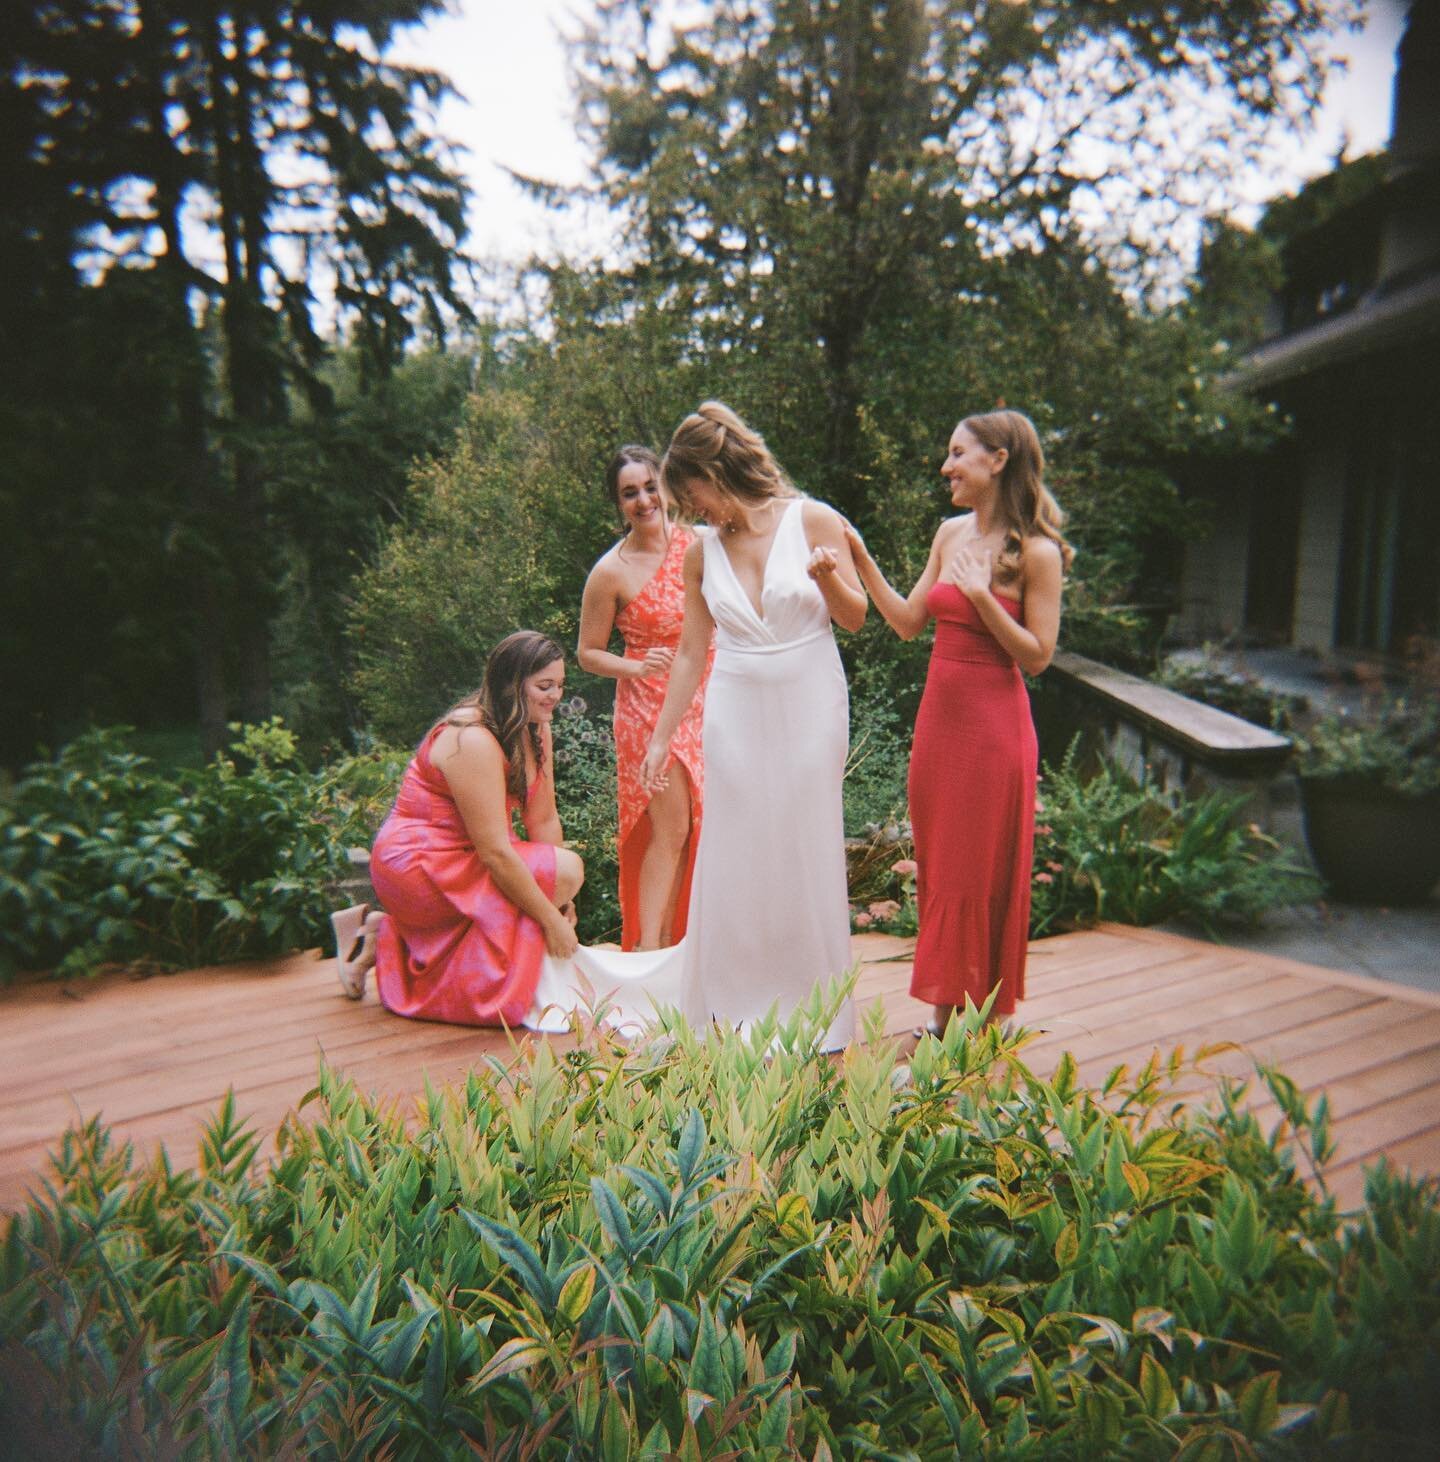 Ellie and her girls, Kingston House, 9/17/22, on 120, 35 mm, and digital 💘 Meant to post these for international women&rsquo;s day✨ we are so grateful to witness and capture these moments of womanhood 🎀